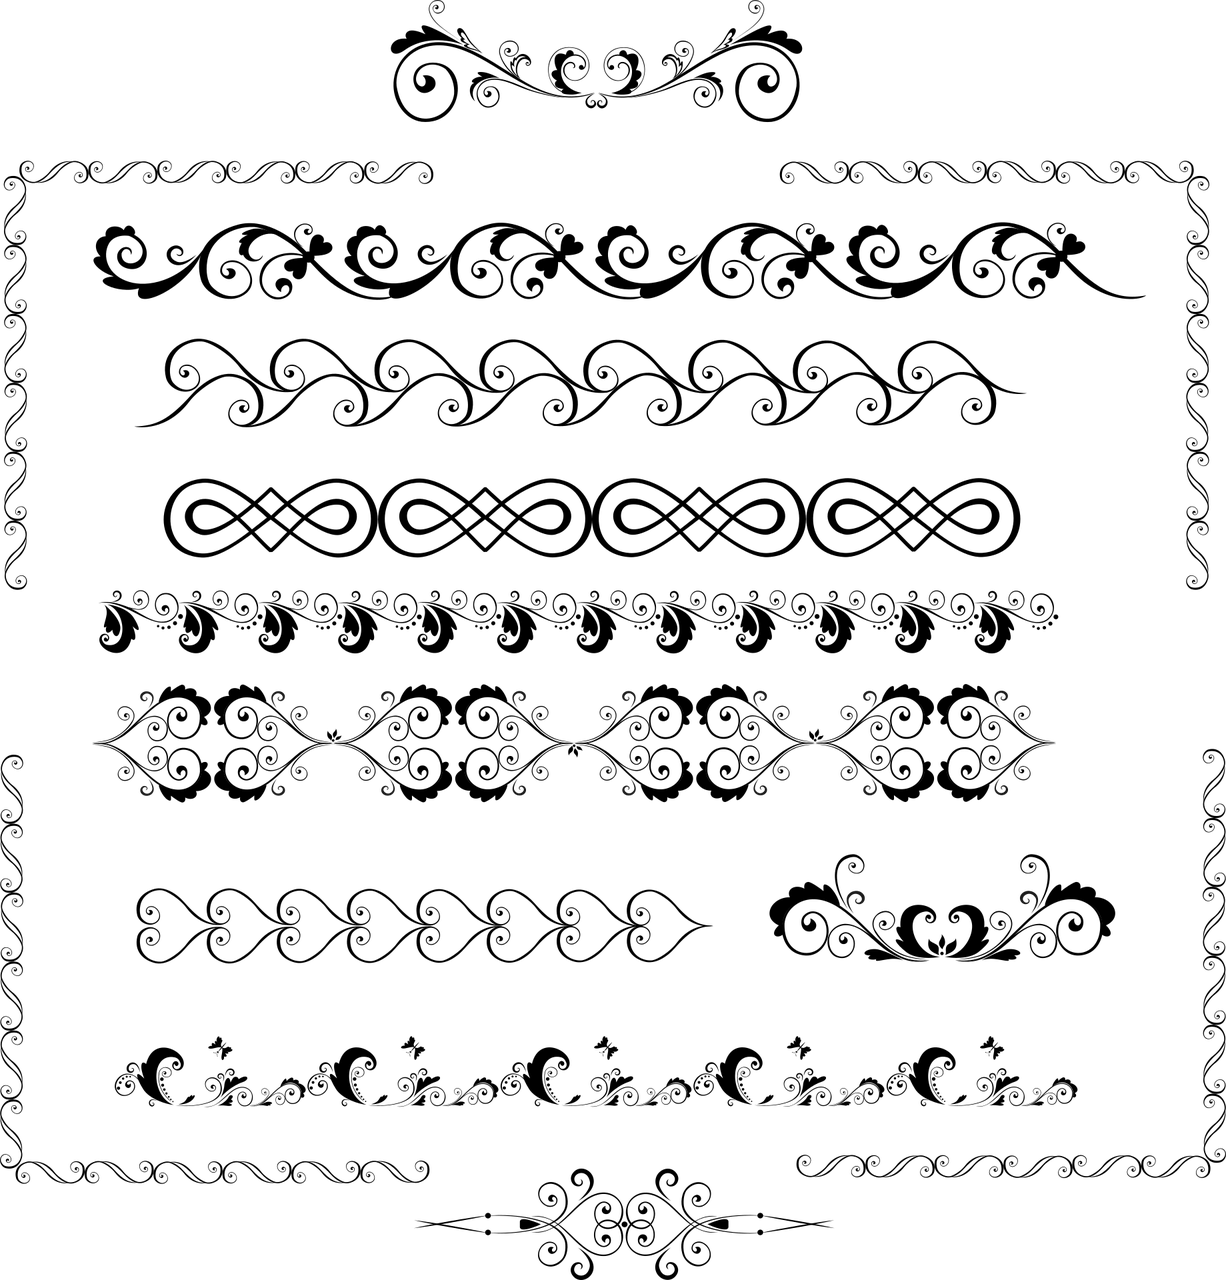 a group of birds flying in the night sky, an album cover, by David Chipperfield, deviantart, ascii art, (empty black void), deathstar, phone wallpaper, black on black